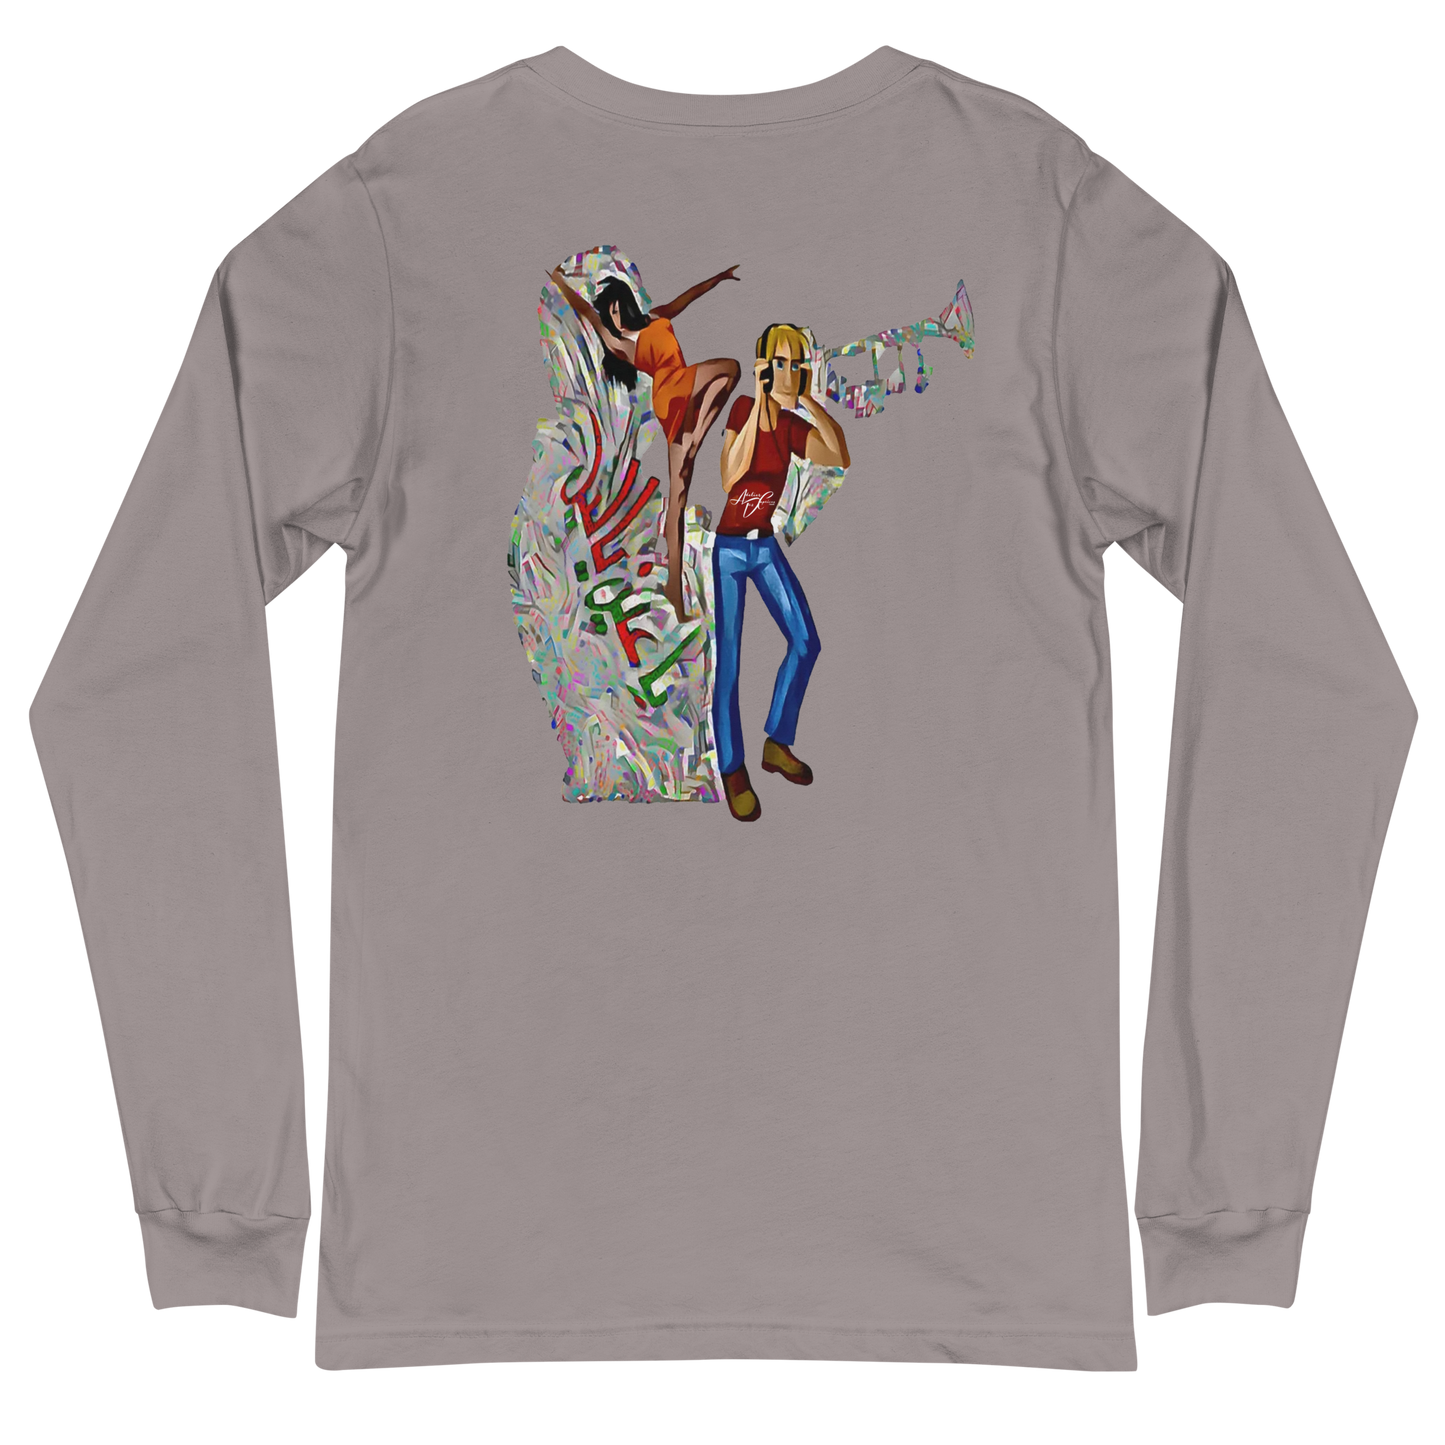 "Ya ein Ya leil" Artistic Unisex Long Sleeve Tee by Atelier Des Caprices - Comfort Meets Exclusive Design